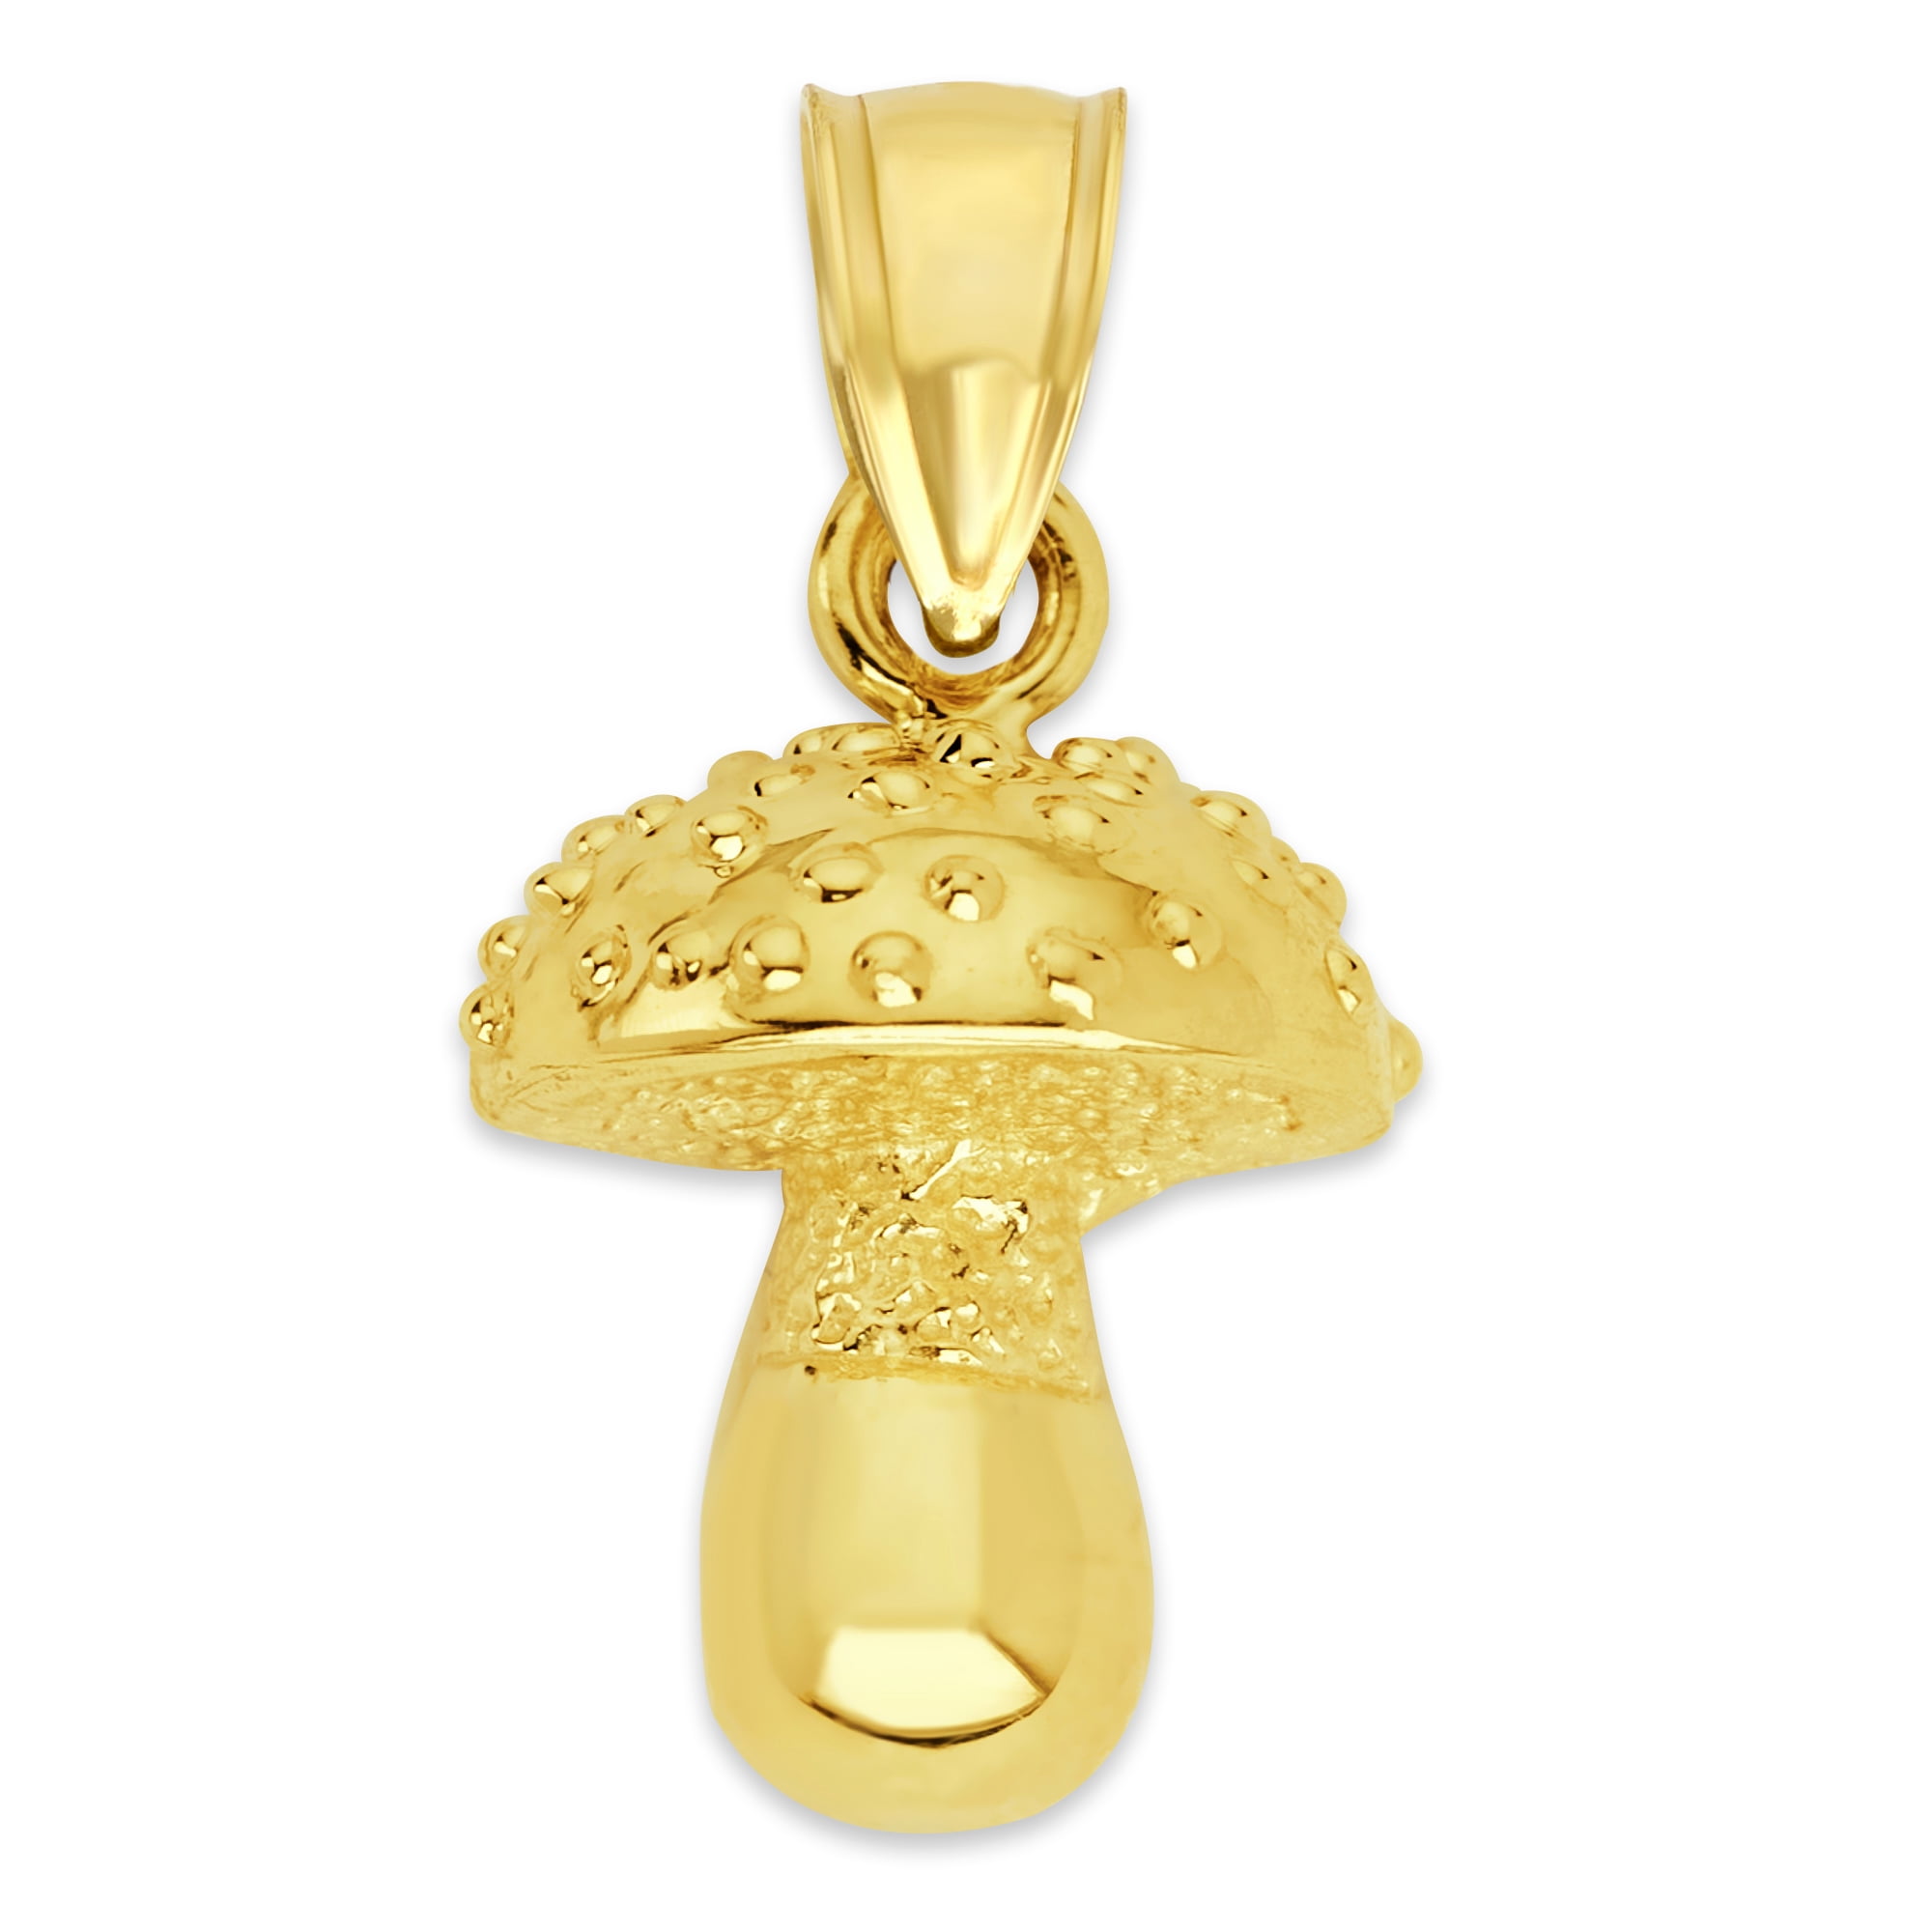 14k Gold Mushroom Pendant, Psychodelic Jewelry, Trippy Gifts for Her